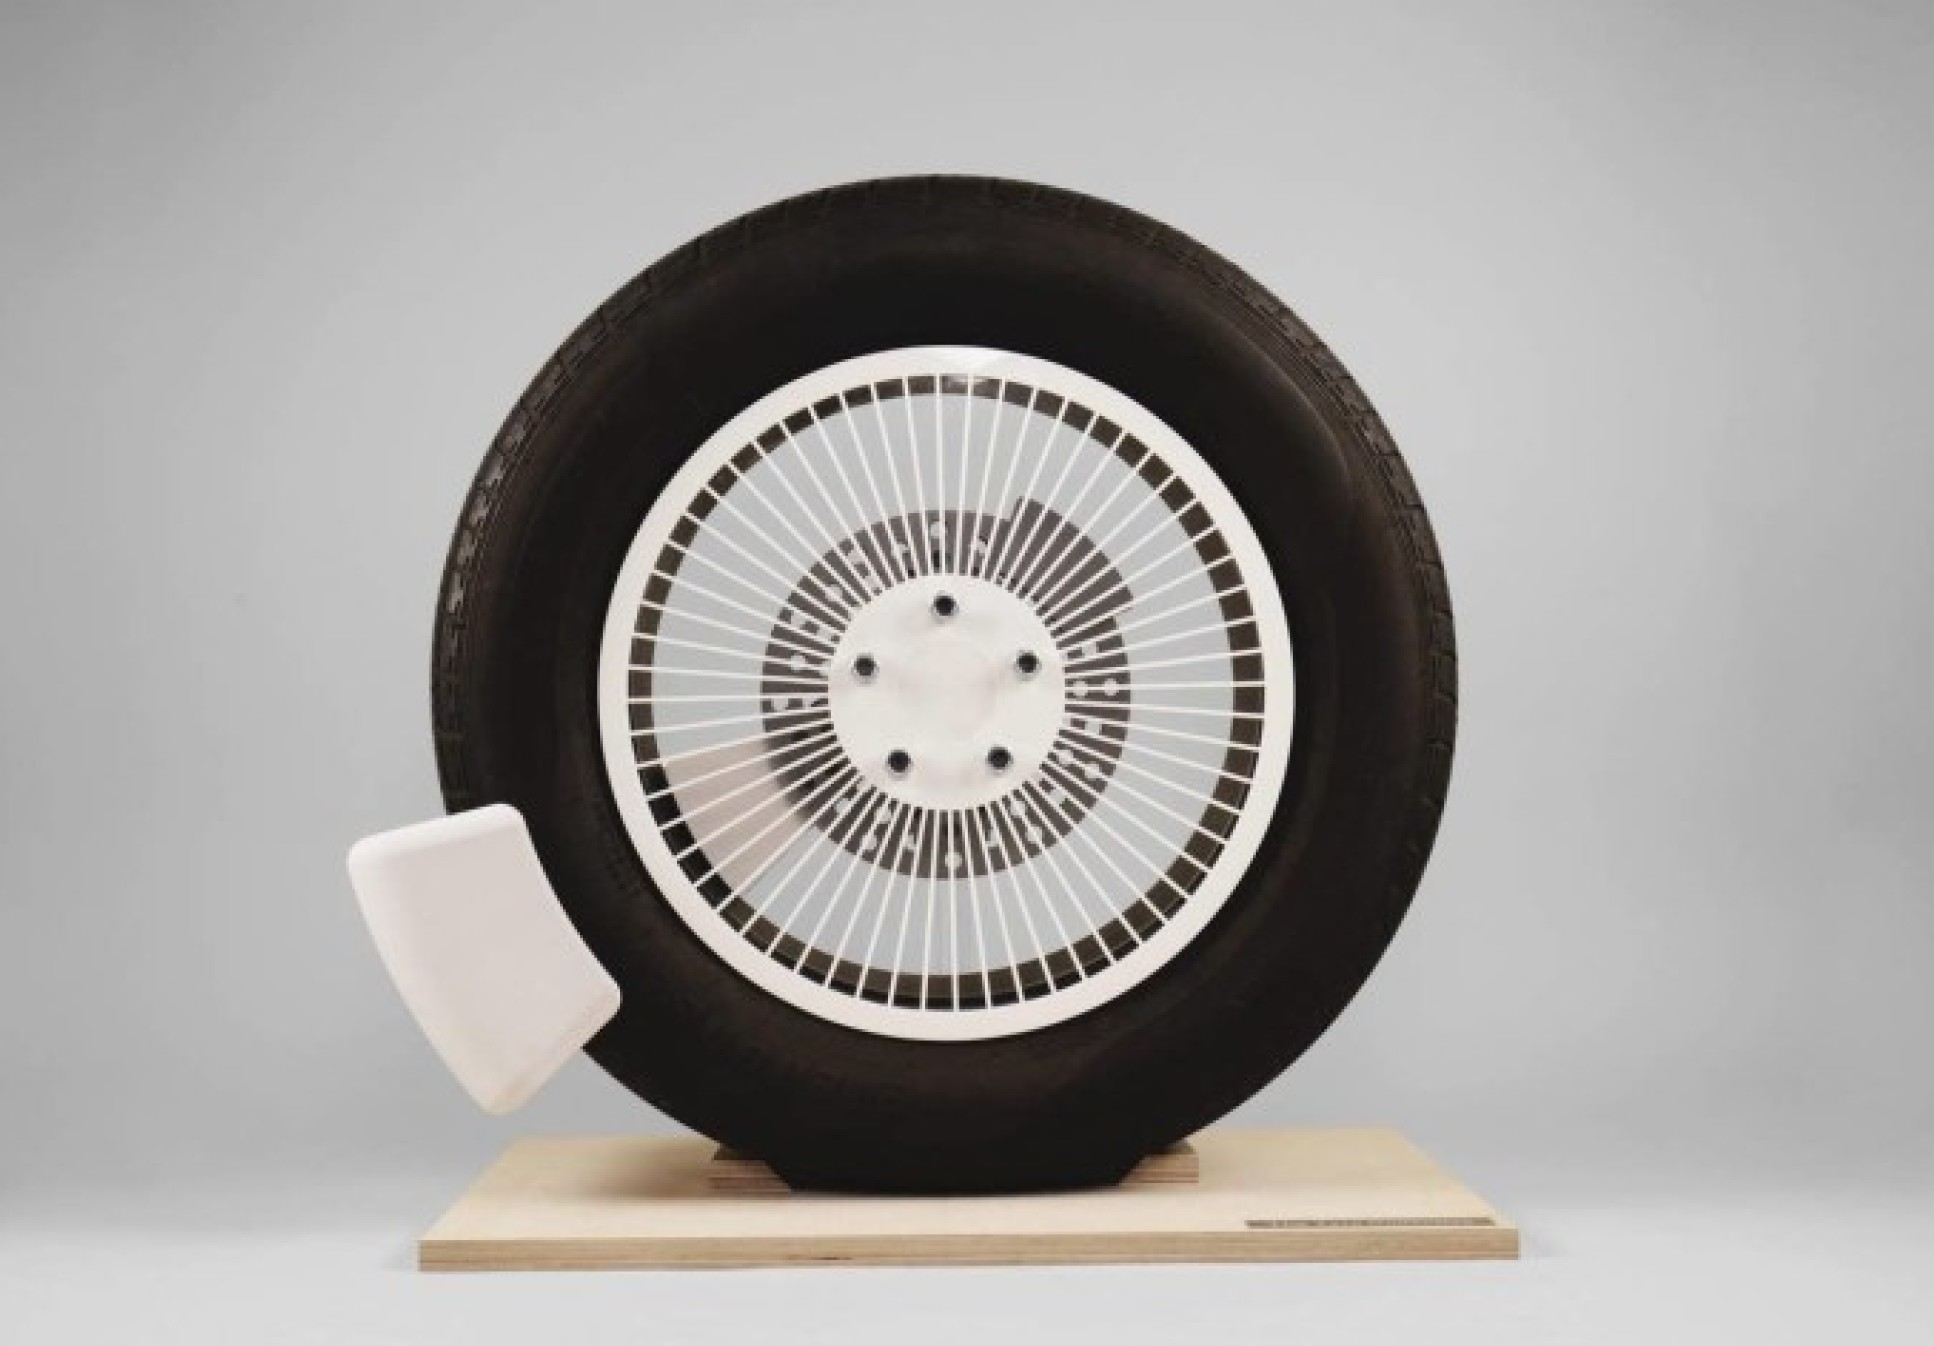 A device fitted to a tyre to collect emissions